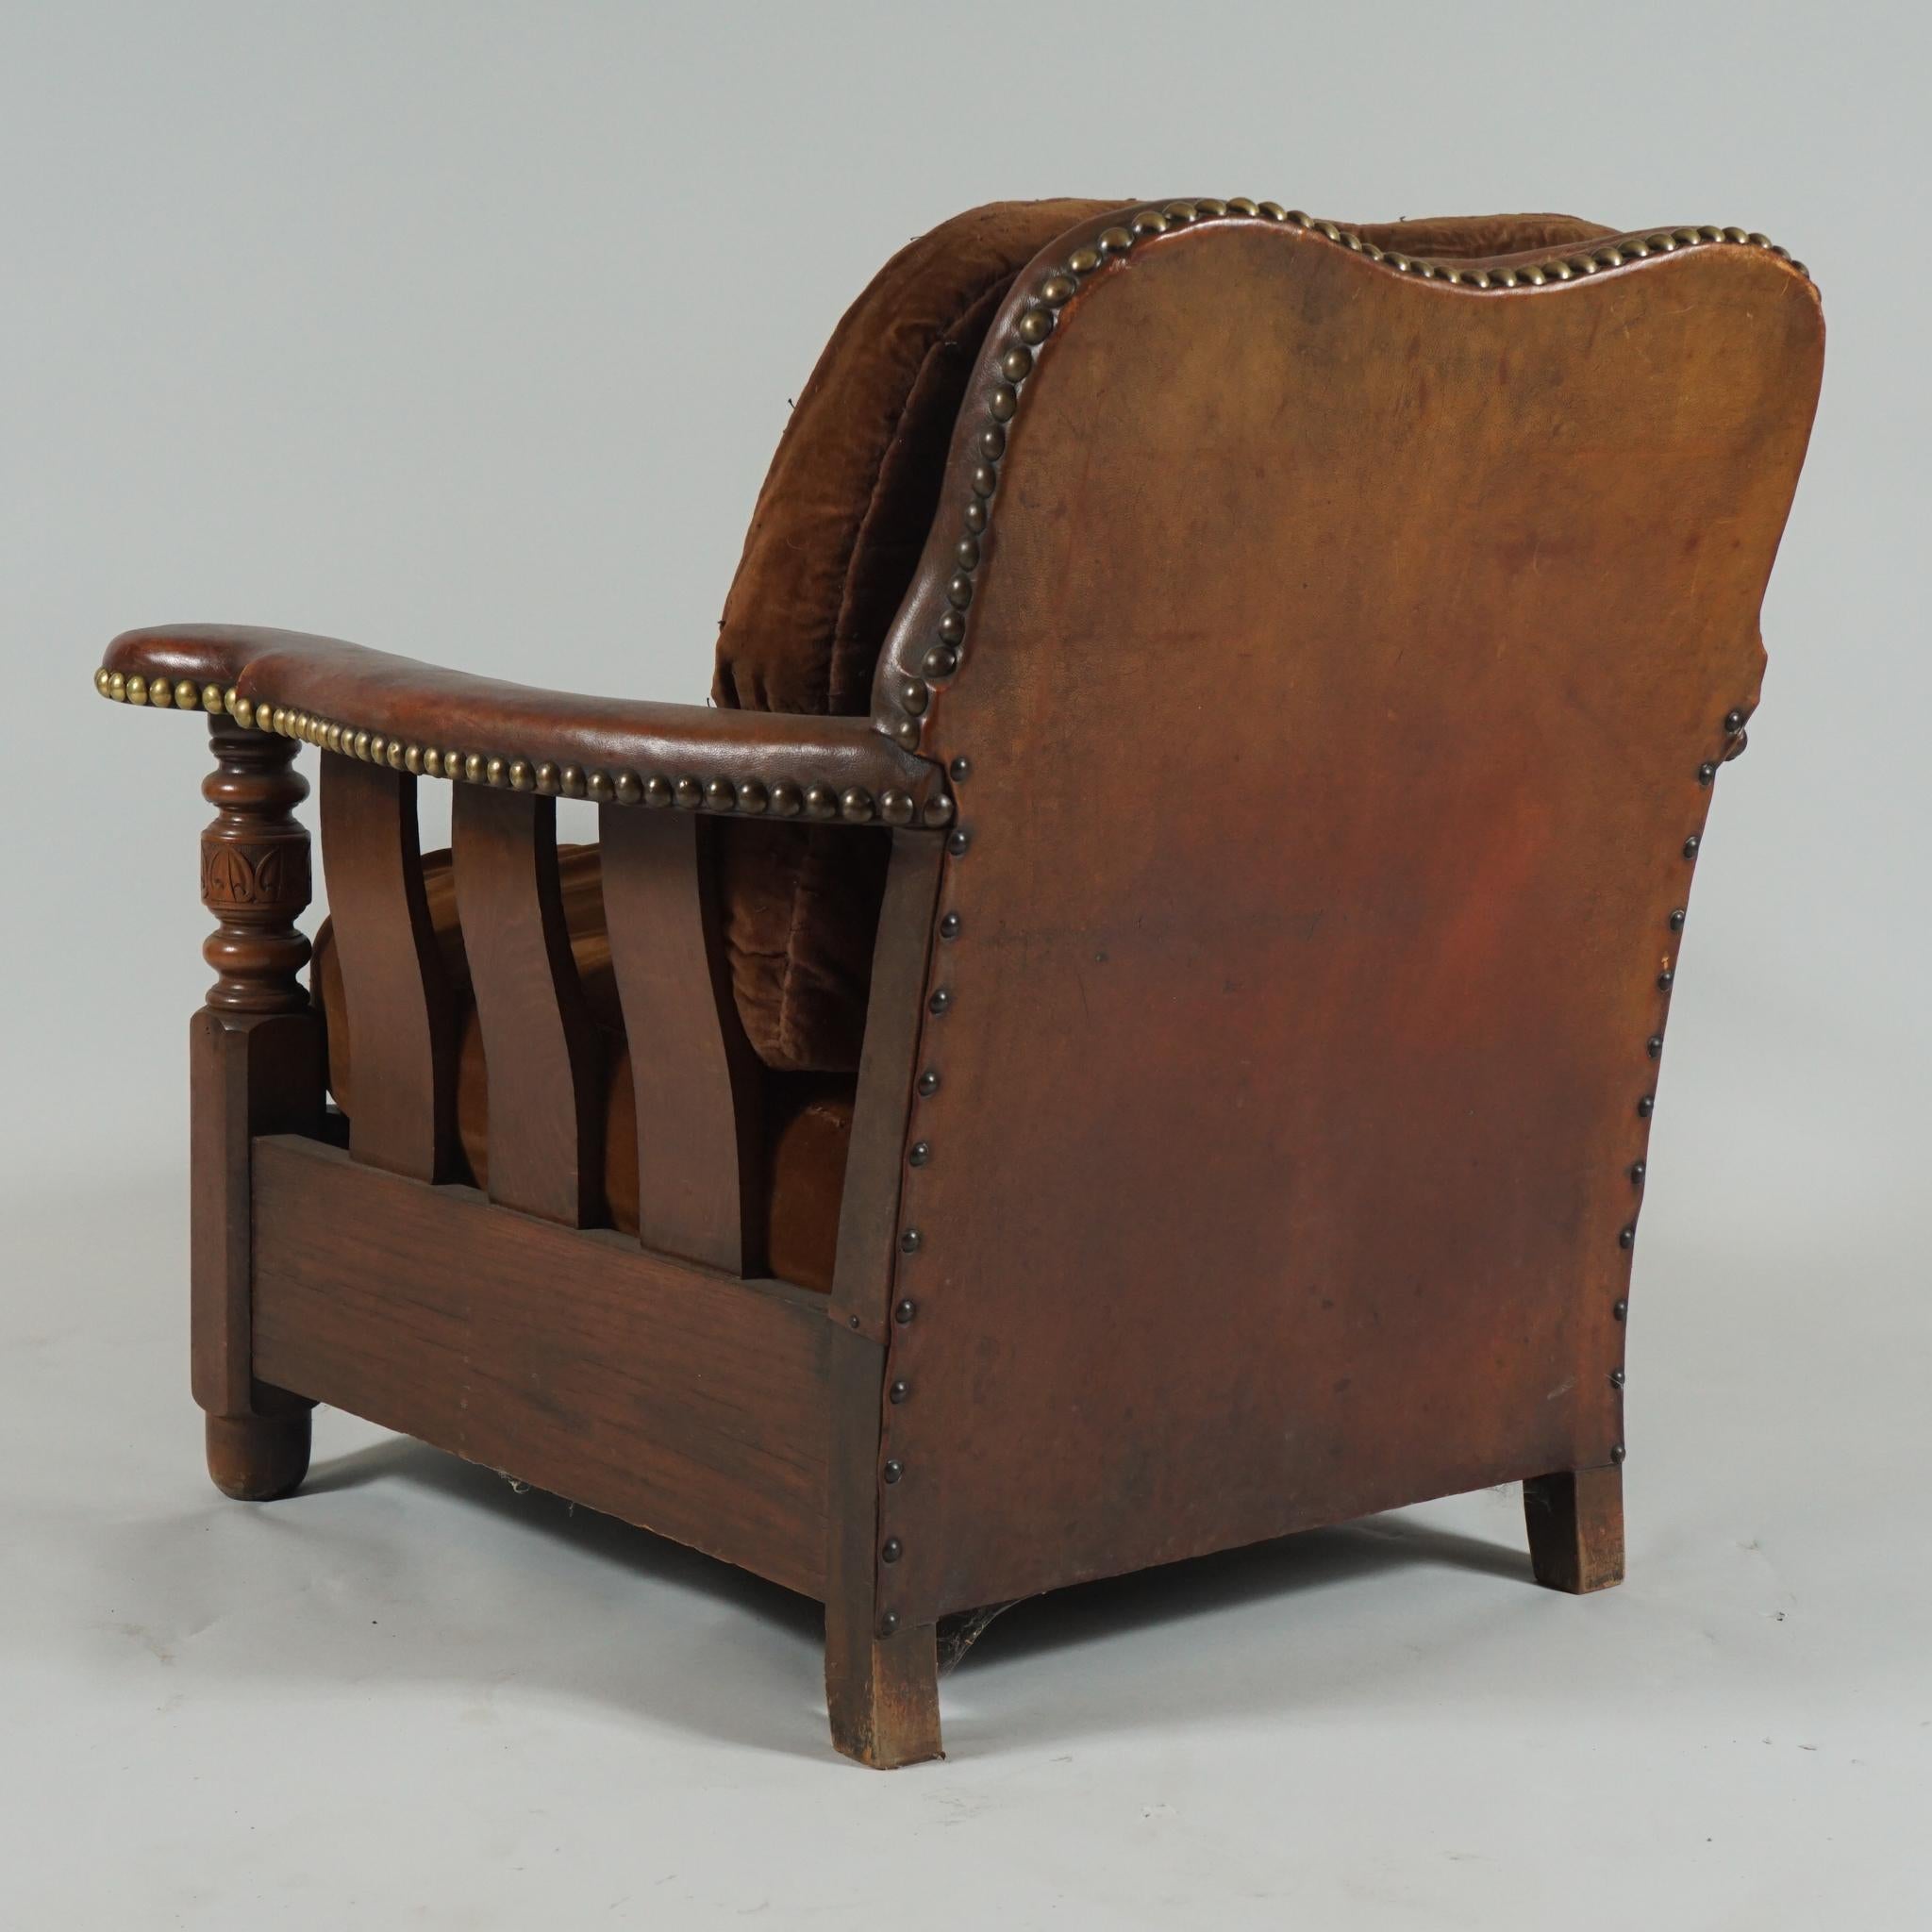 Hand-Crafted Pair of of Unusual Arts & Crafts Leather Armchairs